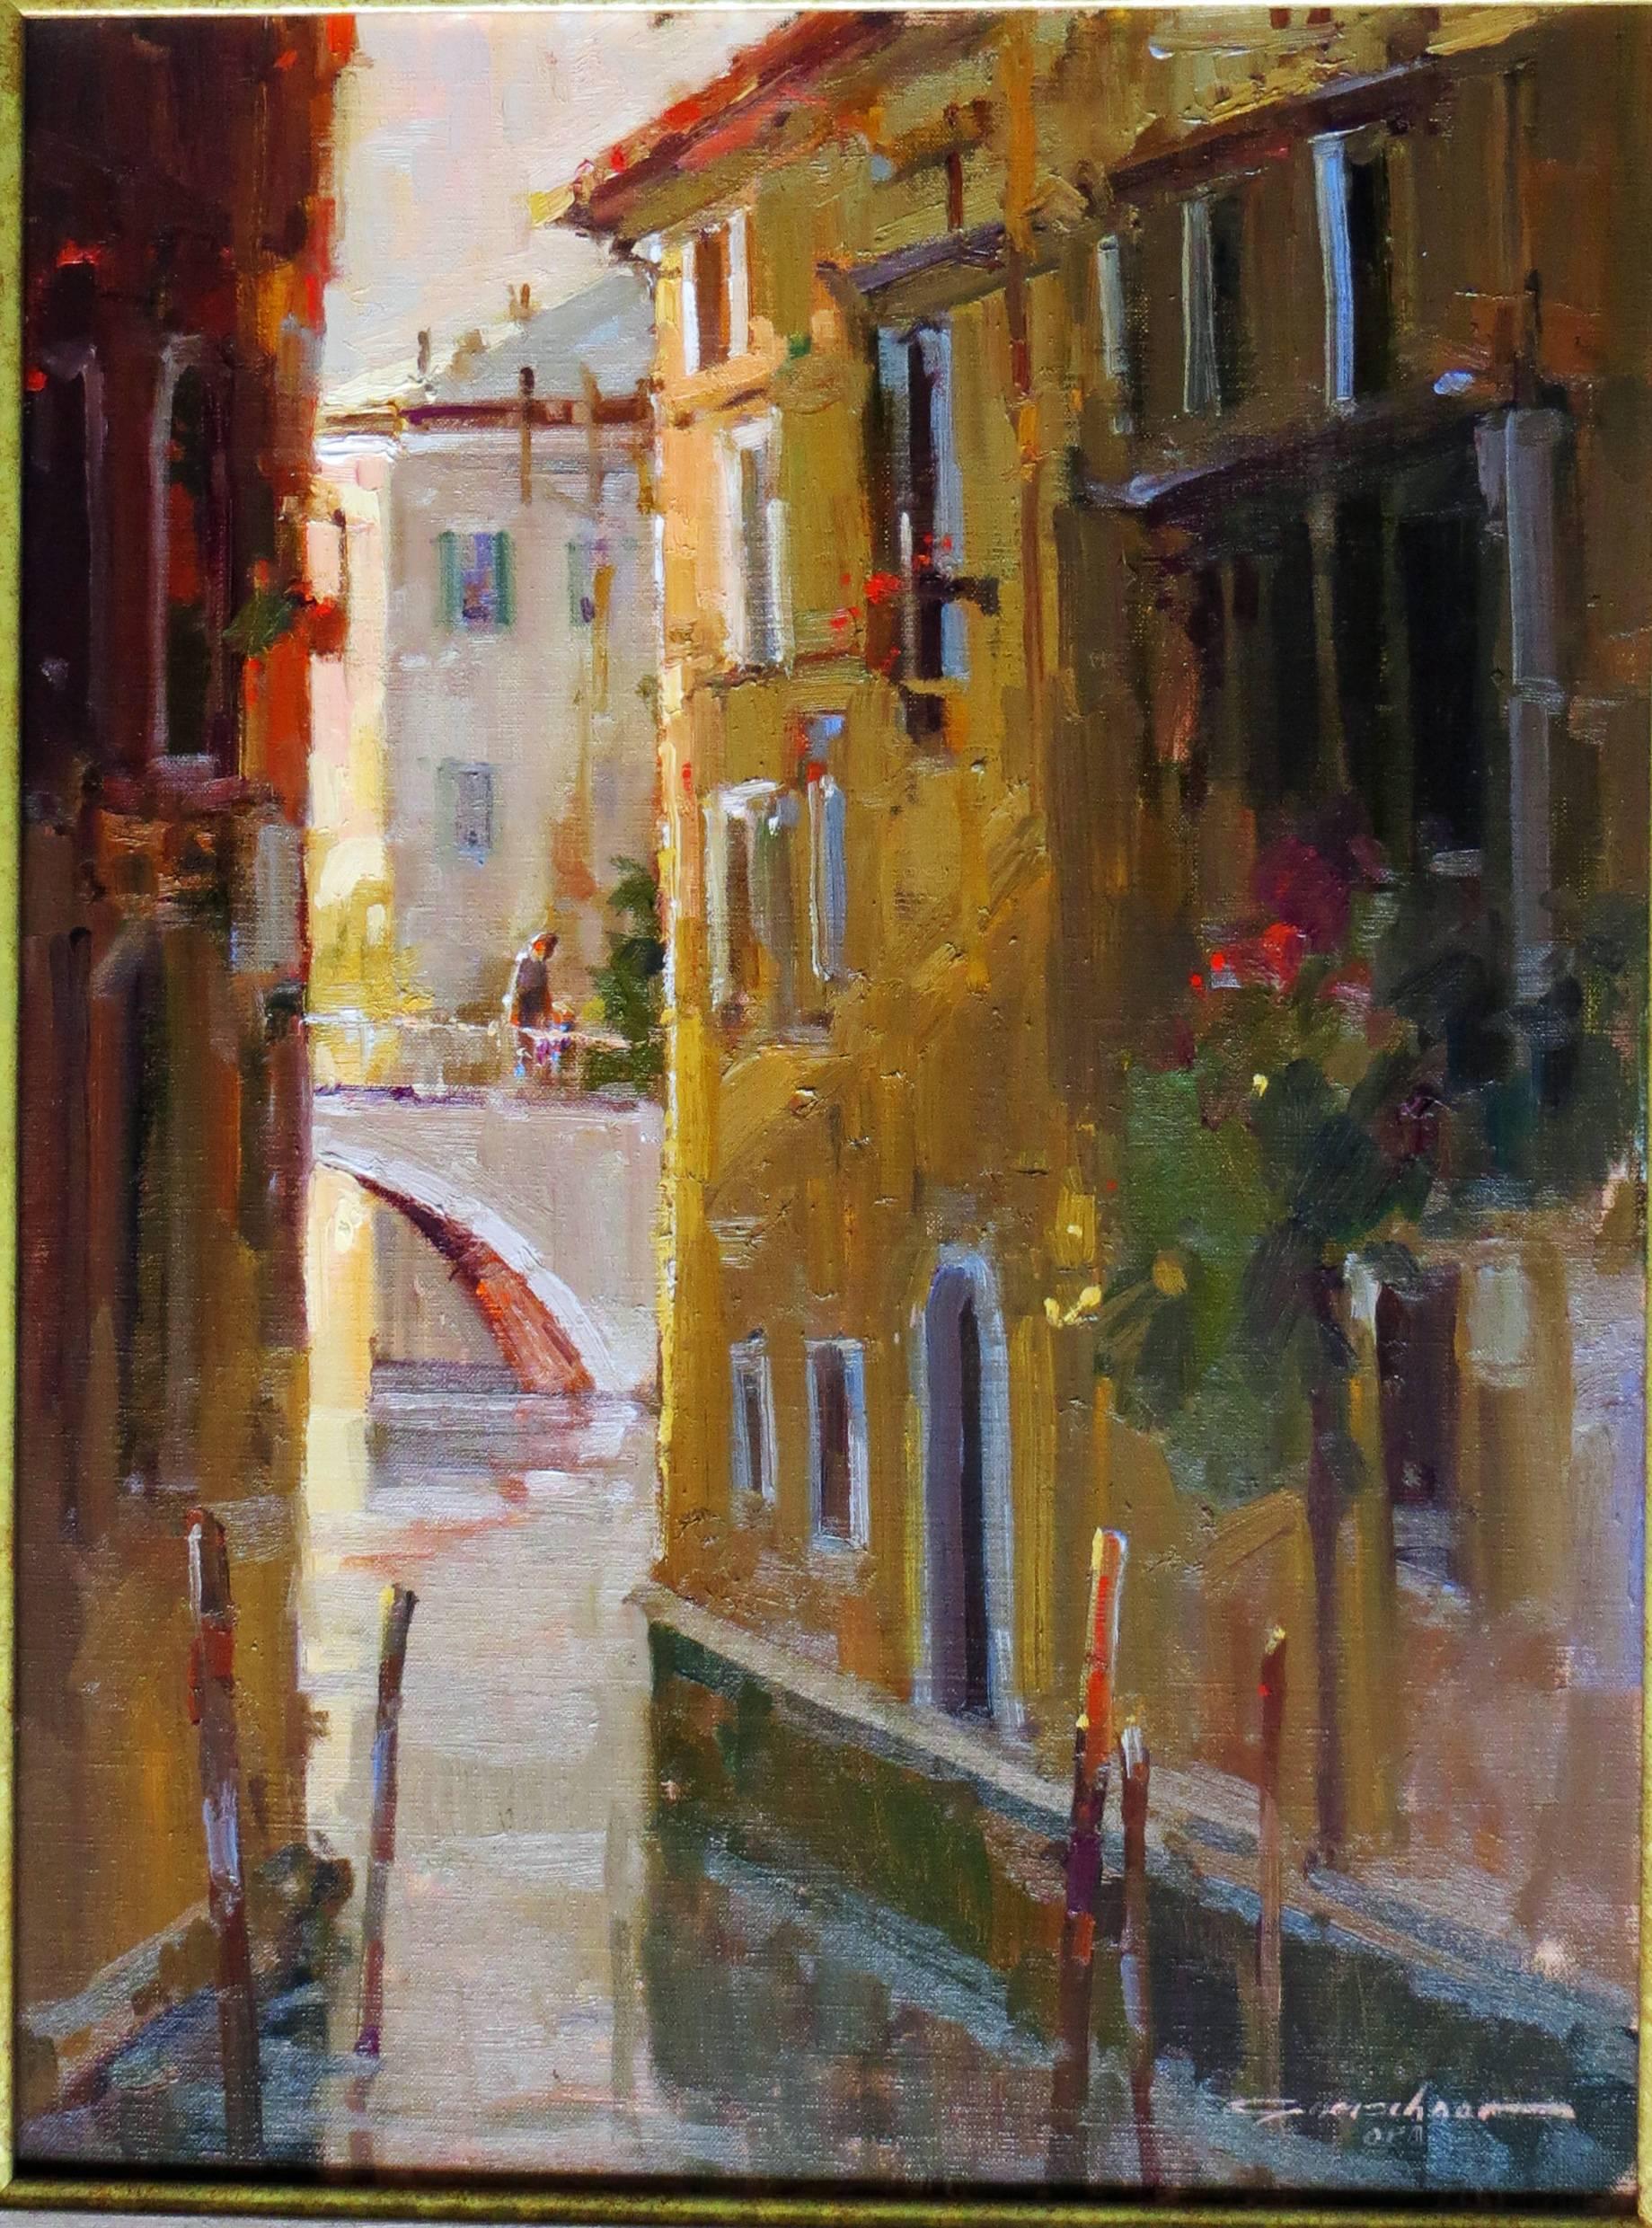 This beautiful oil painting by Ted Goerschner (1933-2012) is titled “Morning Walk, Venice.” It is an intimate, impressionistic depiction of that special light that occurs only in the morning in a special place like Venice. There is a lone figure in